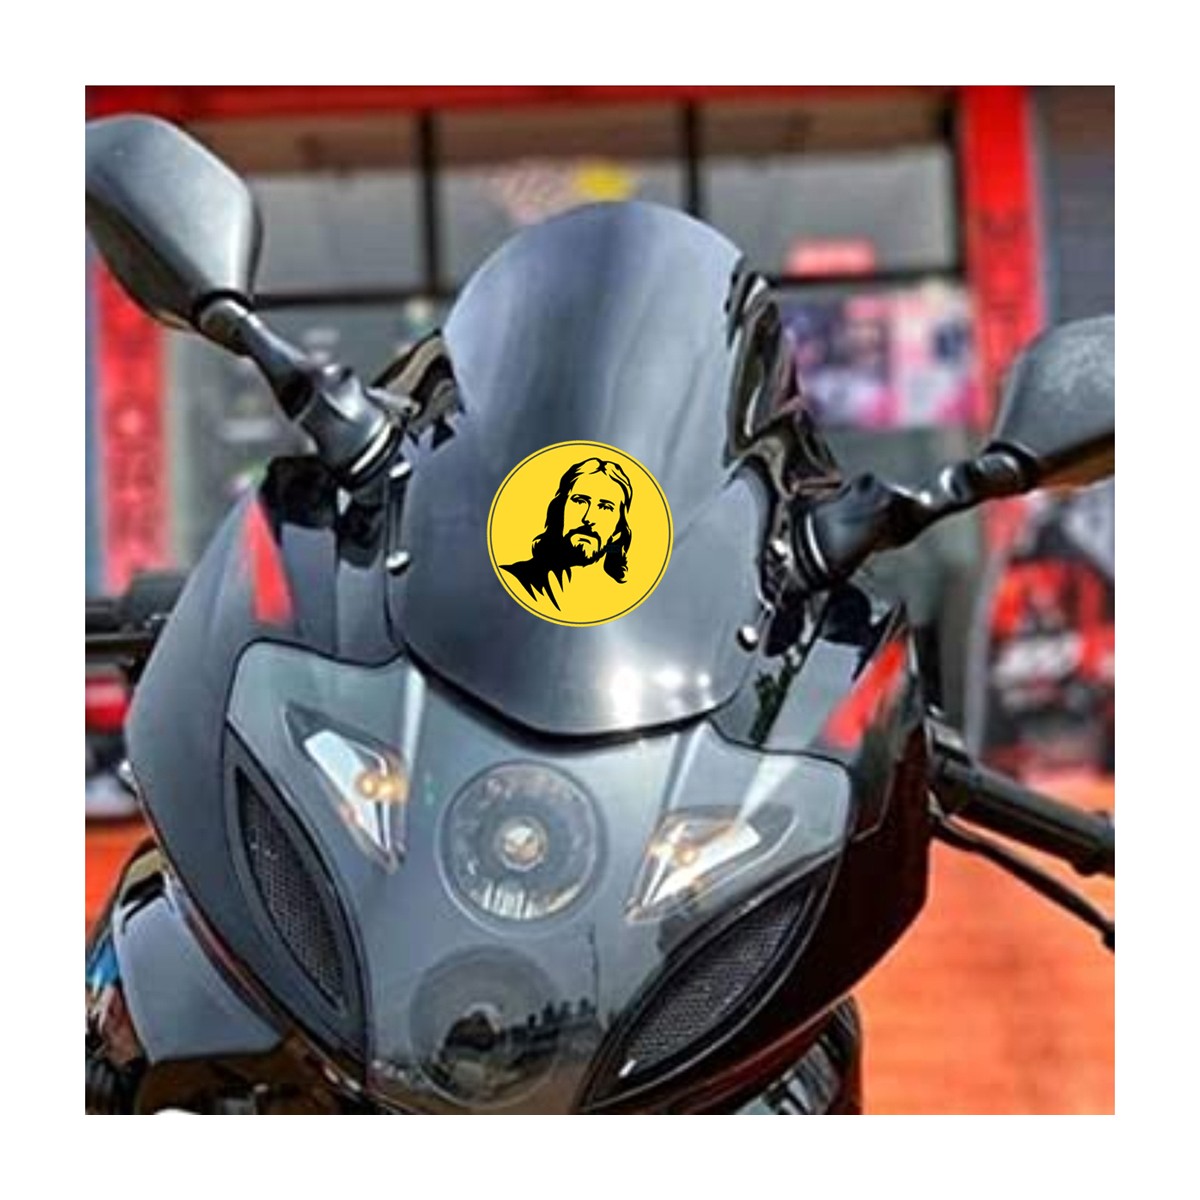 indnone® Lord Jesus Face Logo Sticker for Bike Water Proof PVC Vinyl Decal Sticker | Yellow & Black Color Standard Size